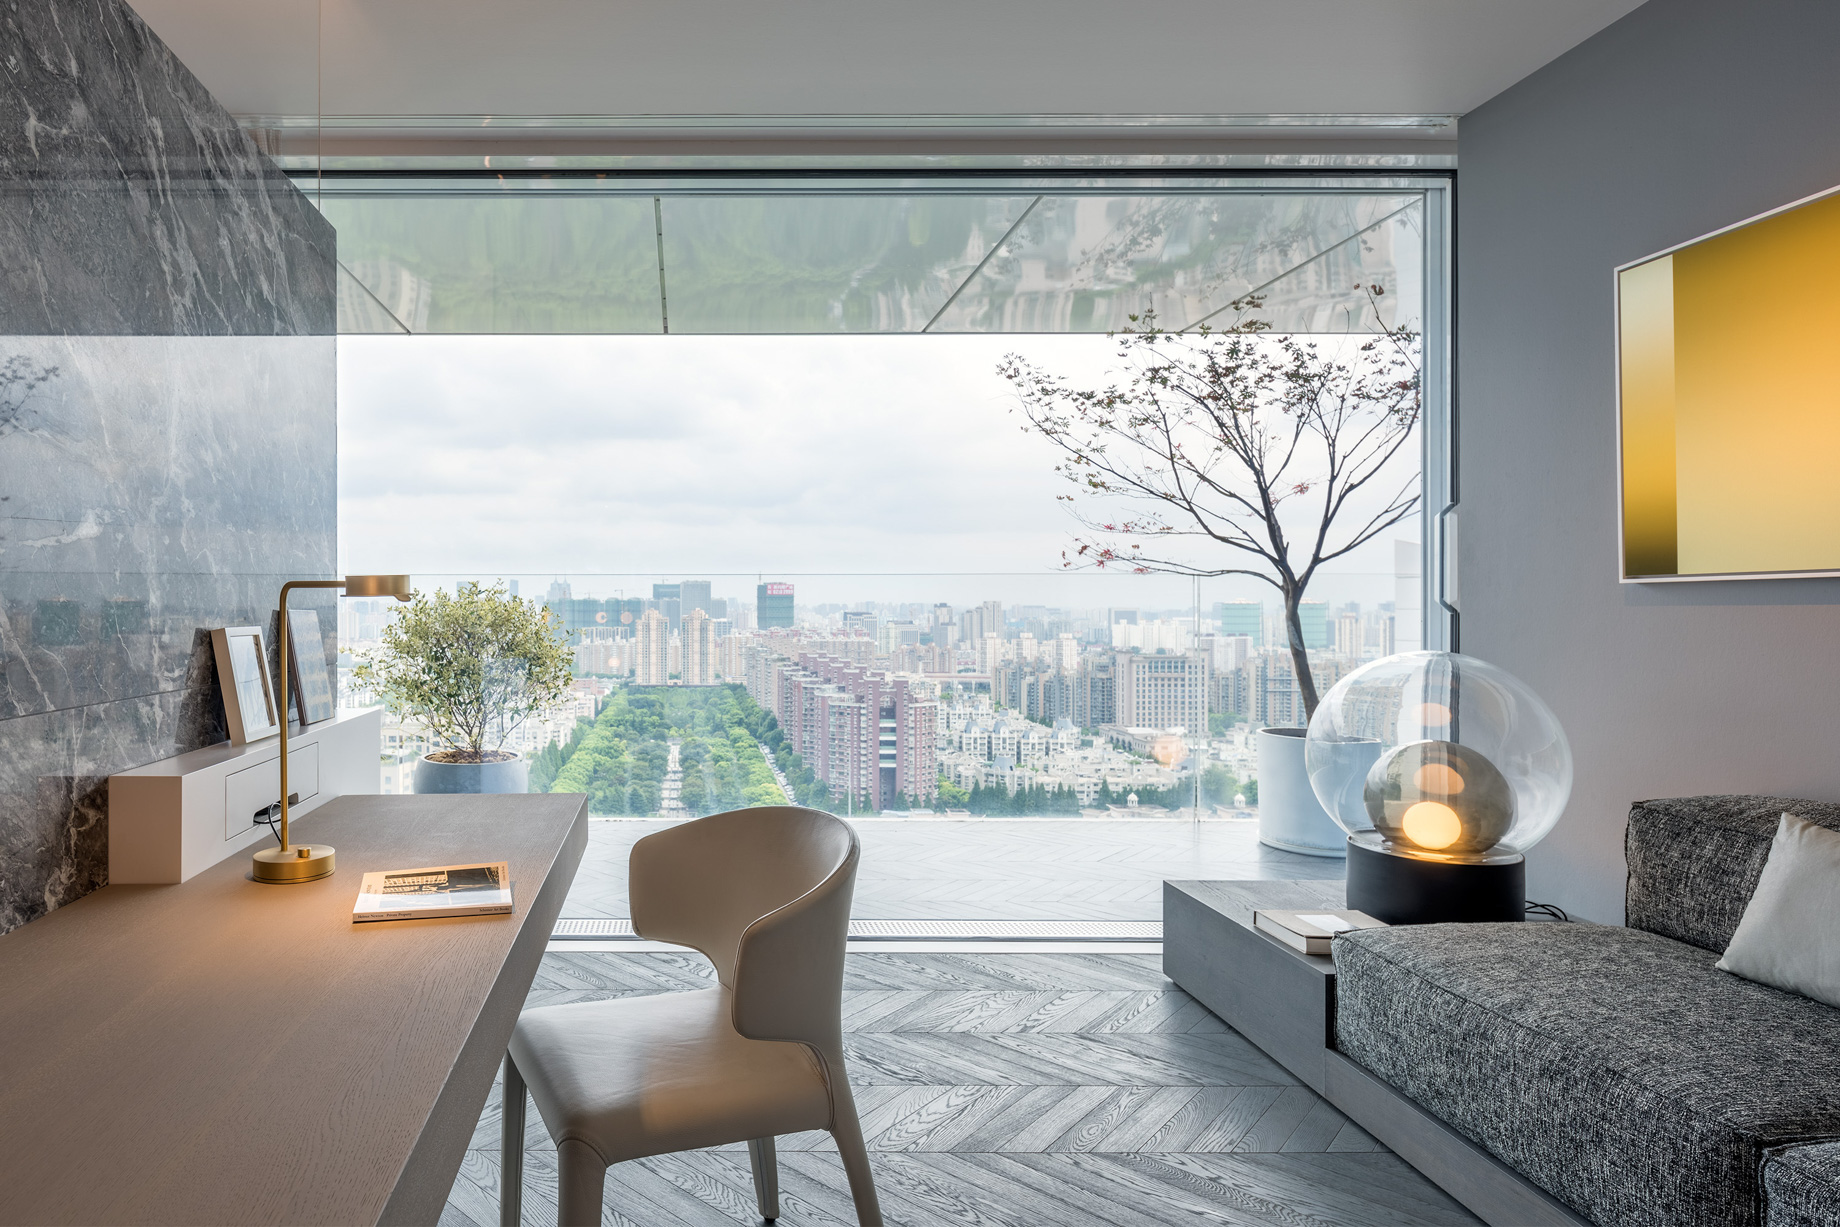 Shades of Grey Apartment Interior Design Shanghai, China - Ippolito Fleitz Group - Office Floor to Ceiling Window View